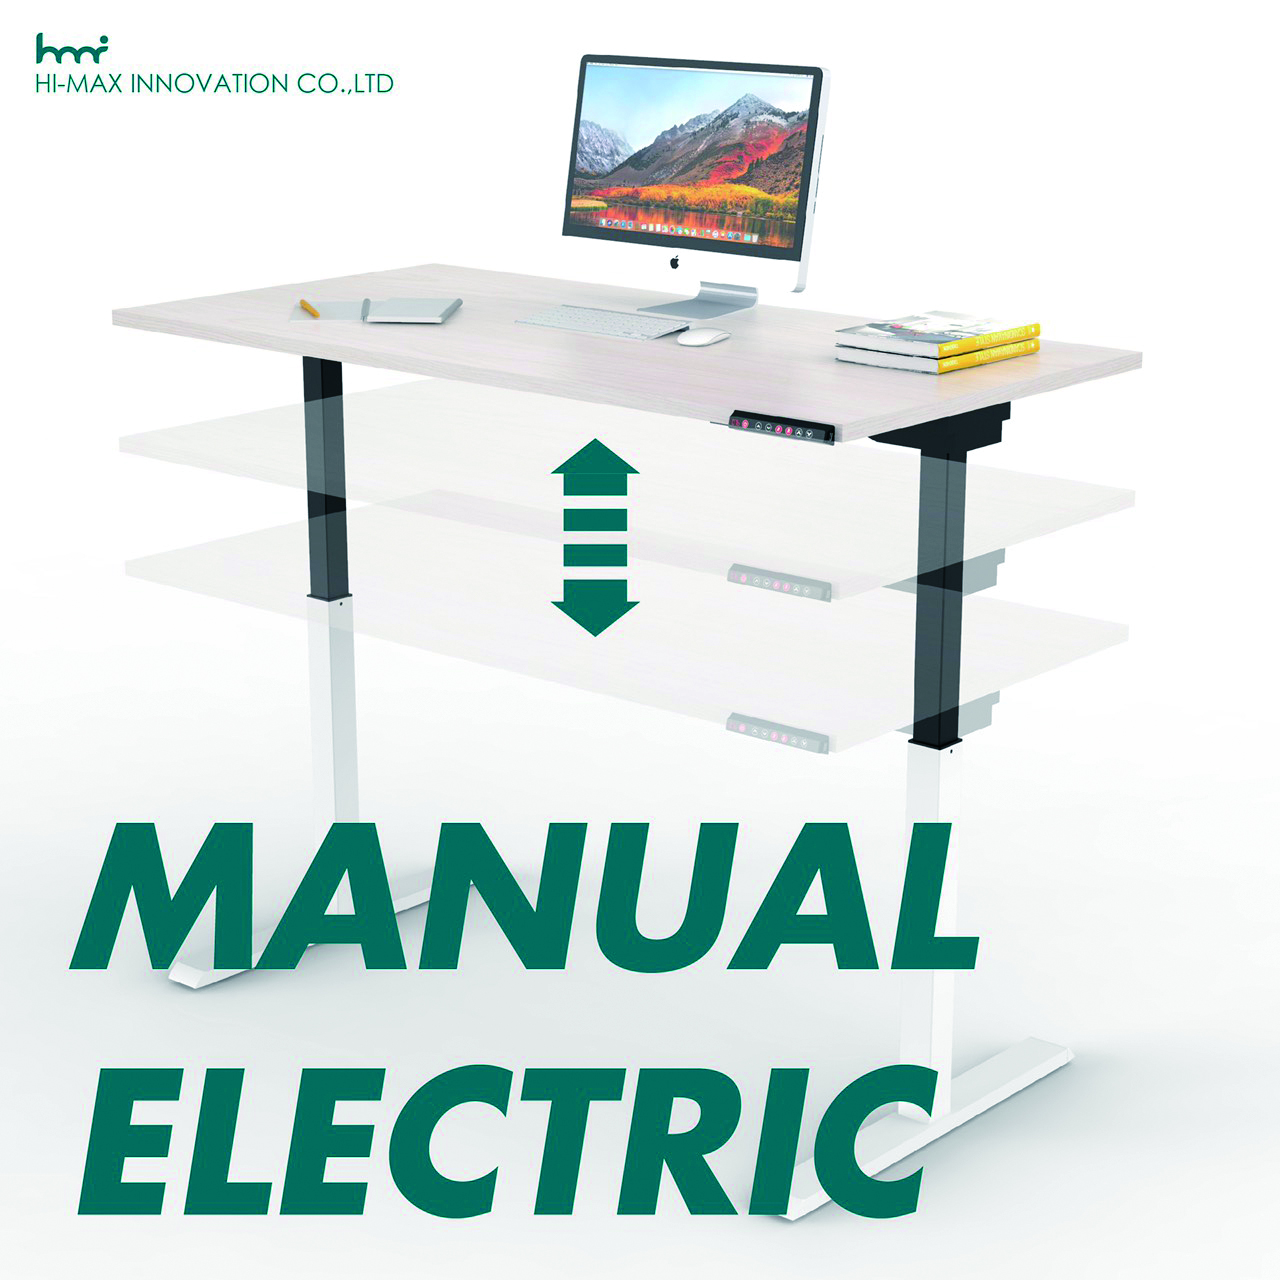 Hi-Maxs height-adjustable desks, coming in manual and electric types, are adaptable in any environment. (photo provided by Hi-Max)